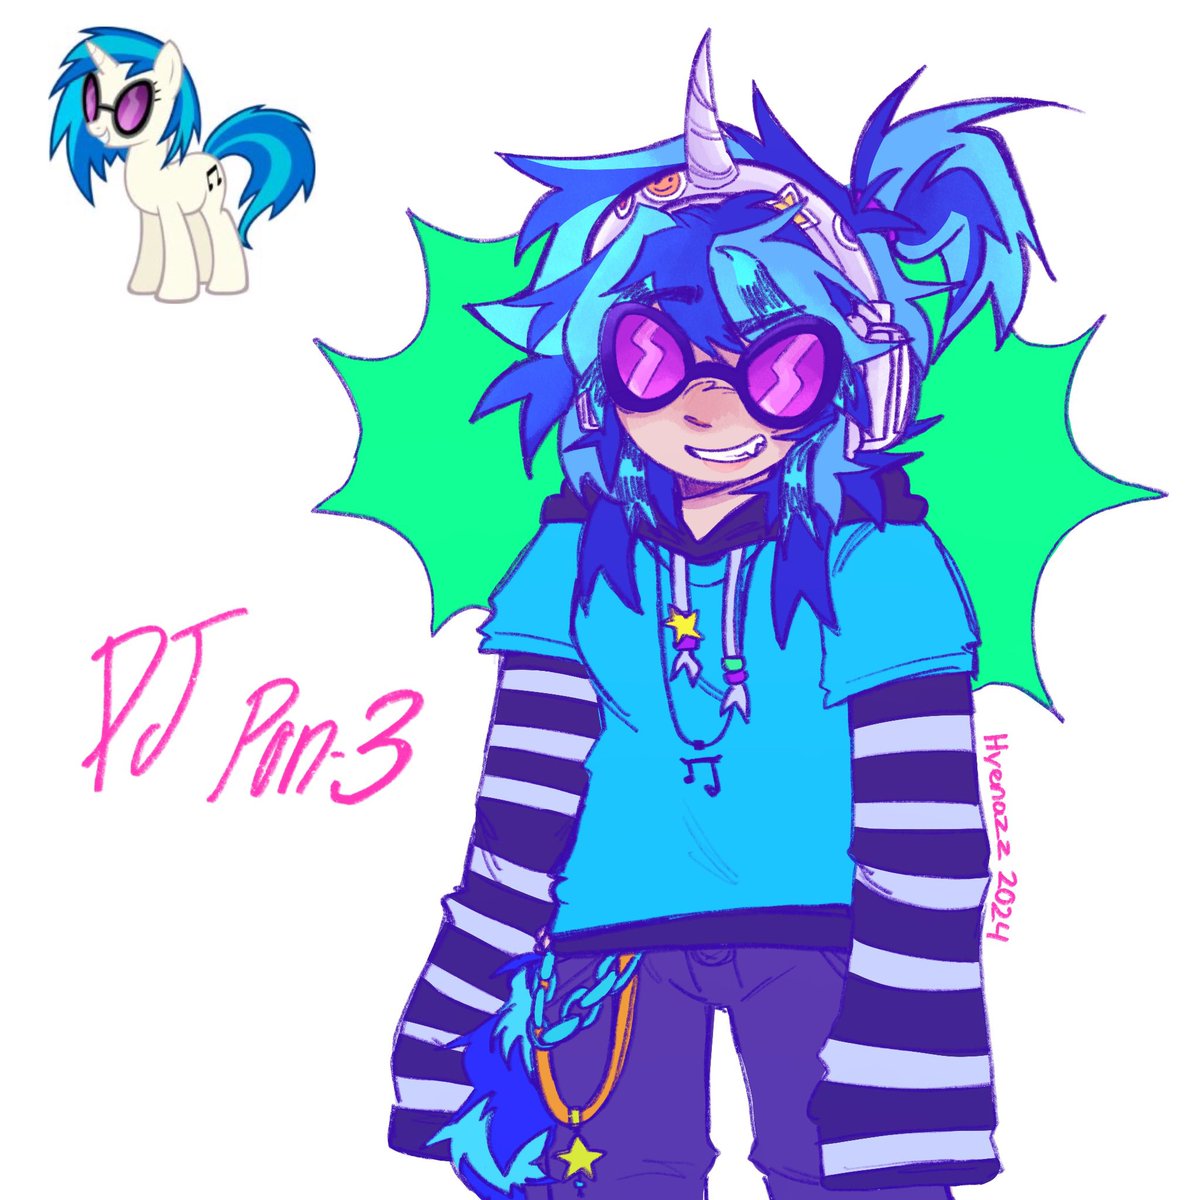 Wooaaah dj sillyness,, (dj pon-3 is one of my favorite mlp characters especially thats still around for friendship is magic
#mlpfanart #mlpfim #mlp #art